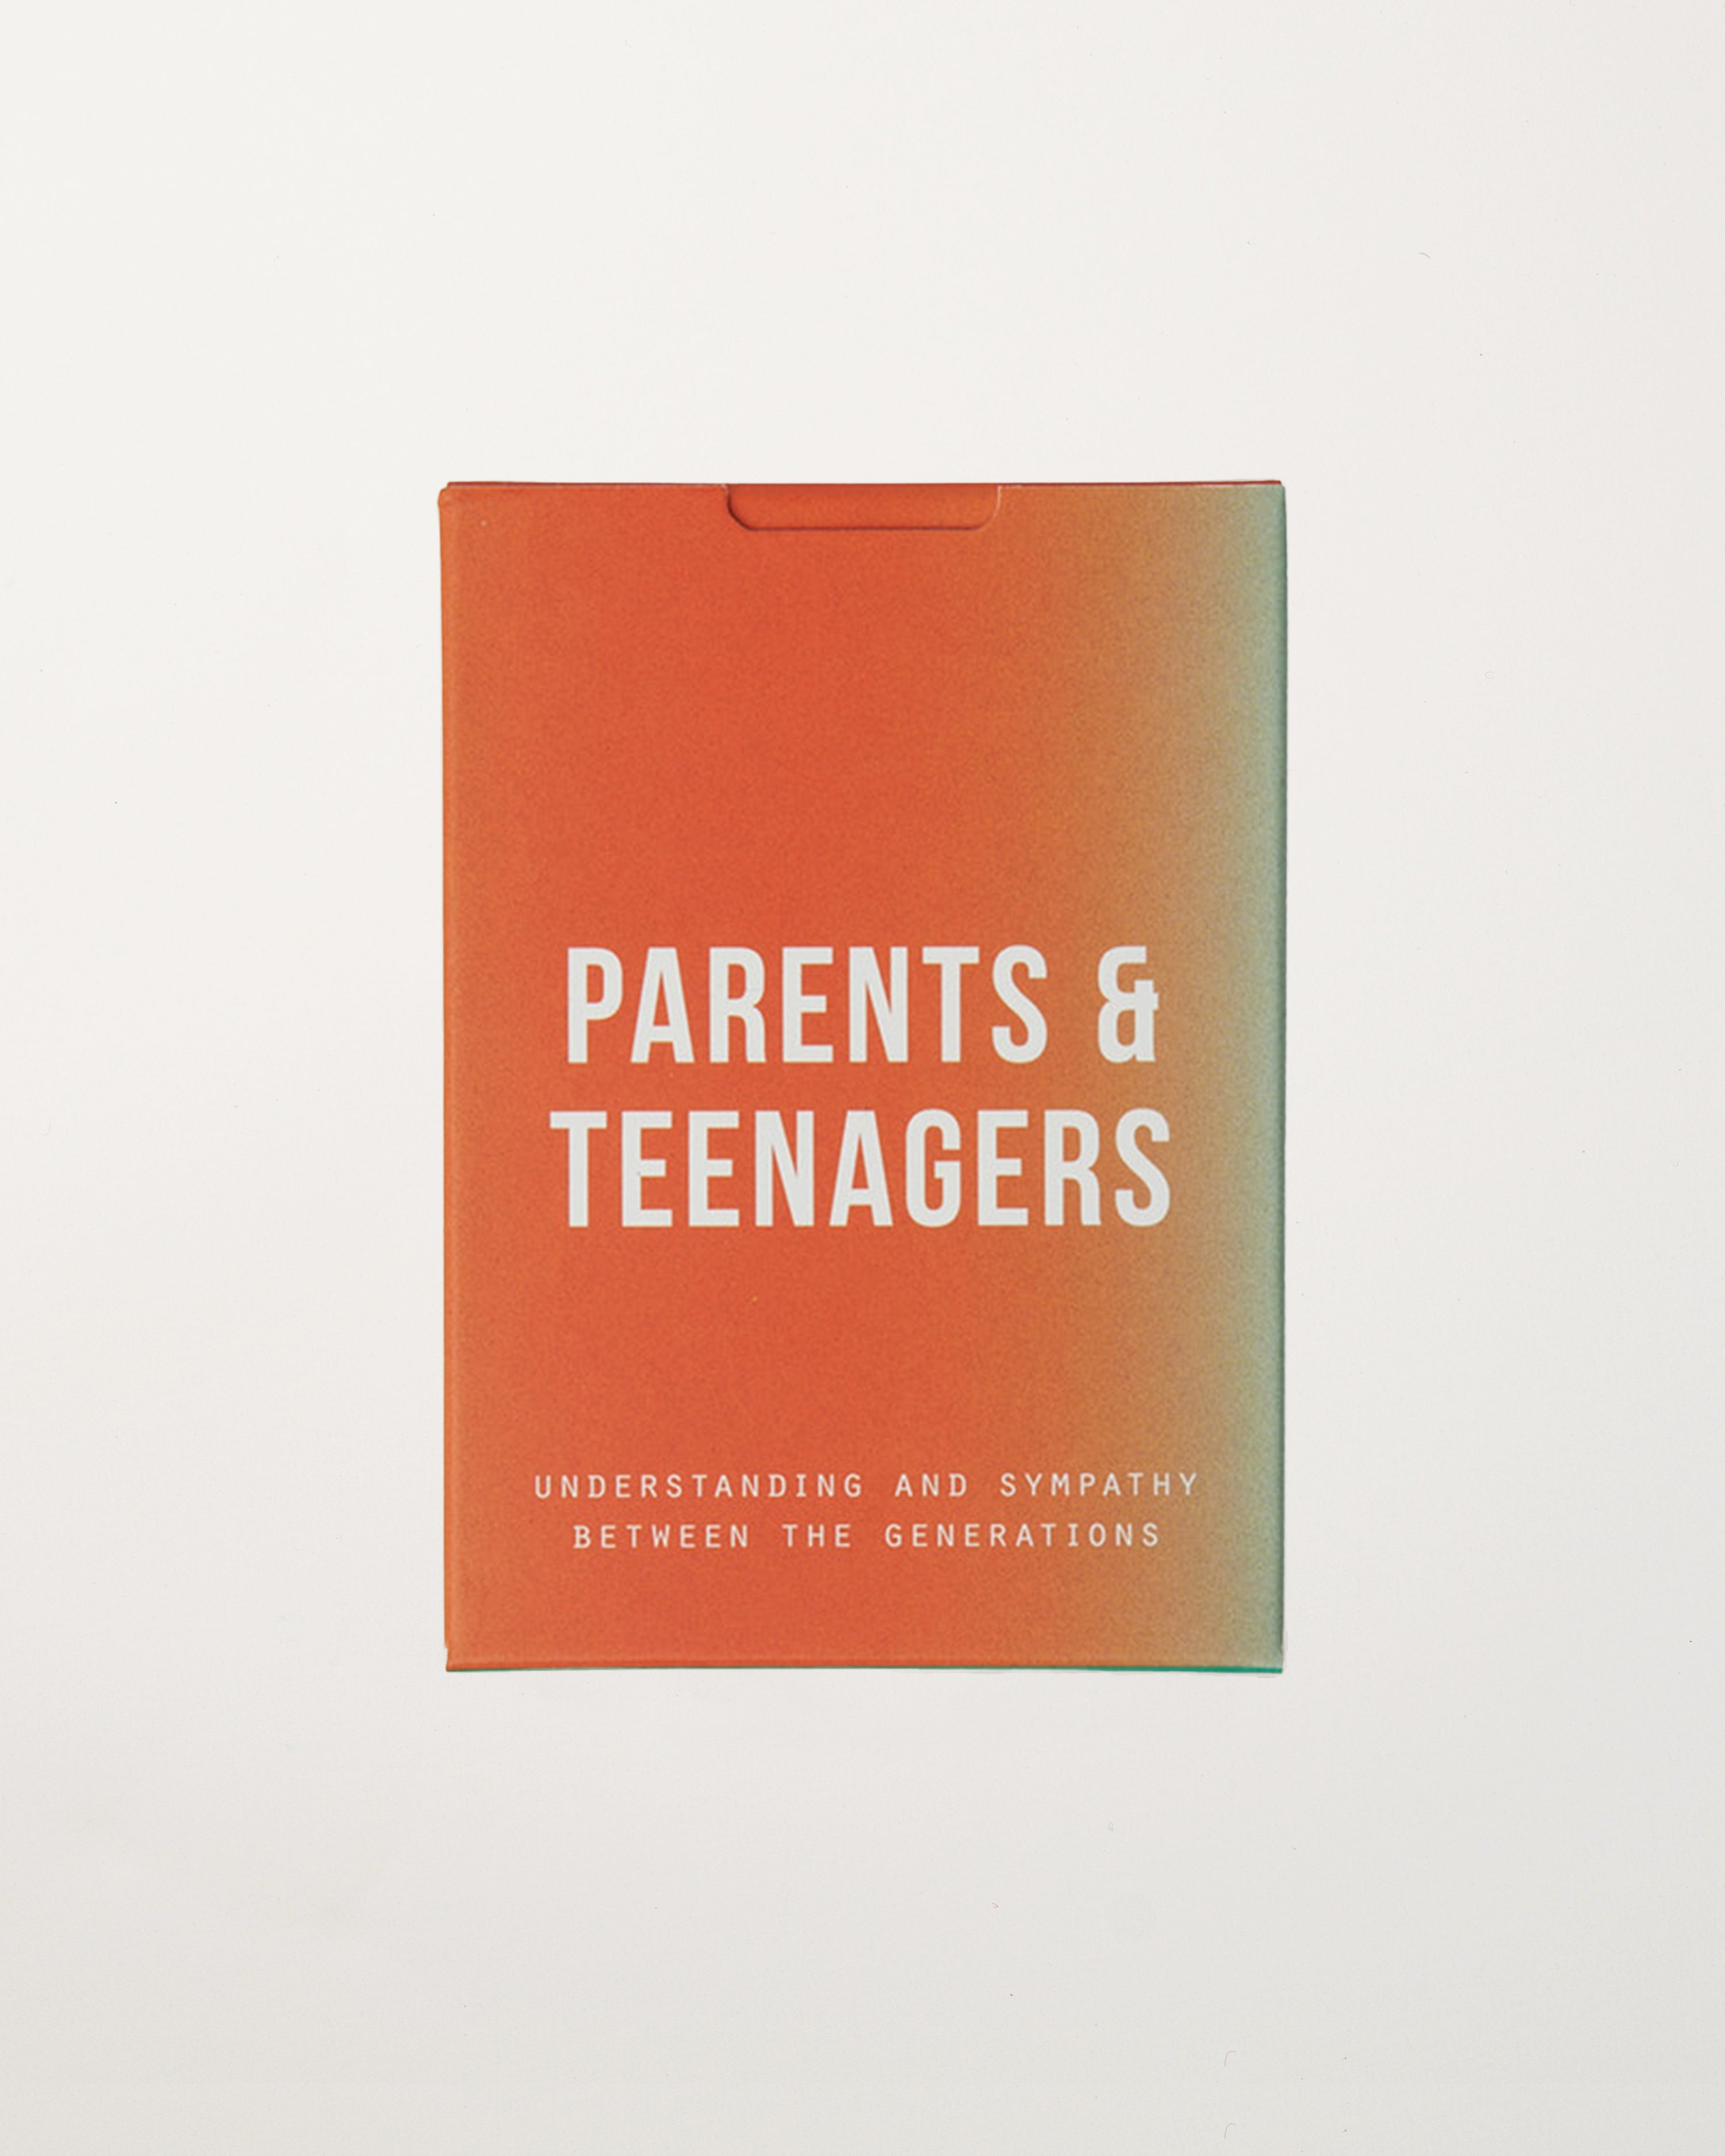 Parents & Teenagers Cards